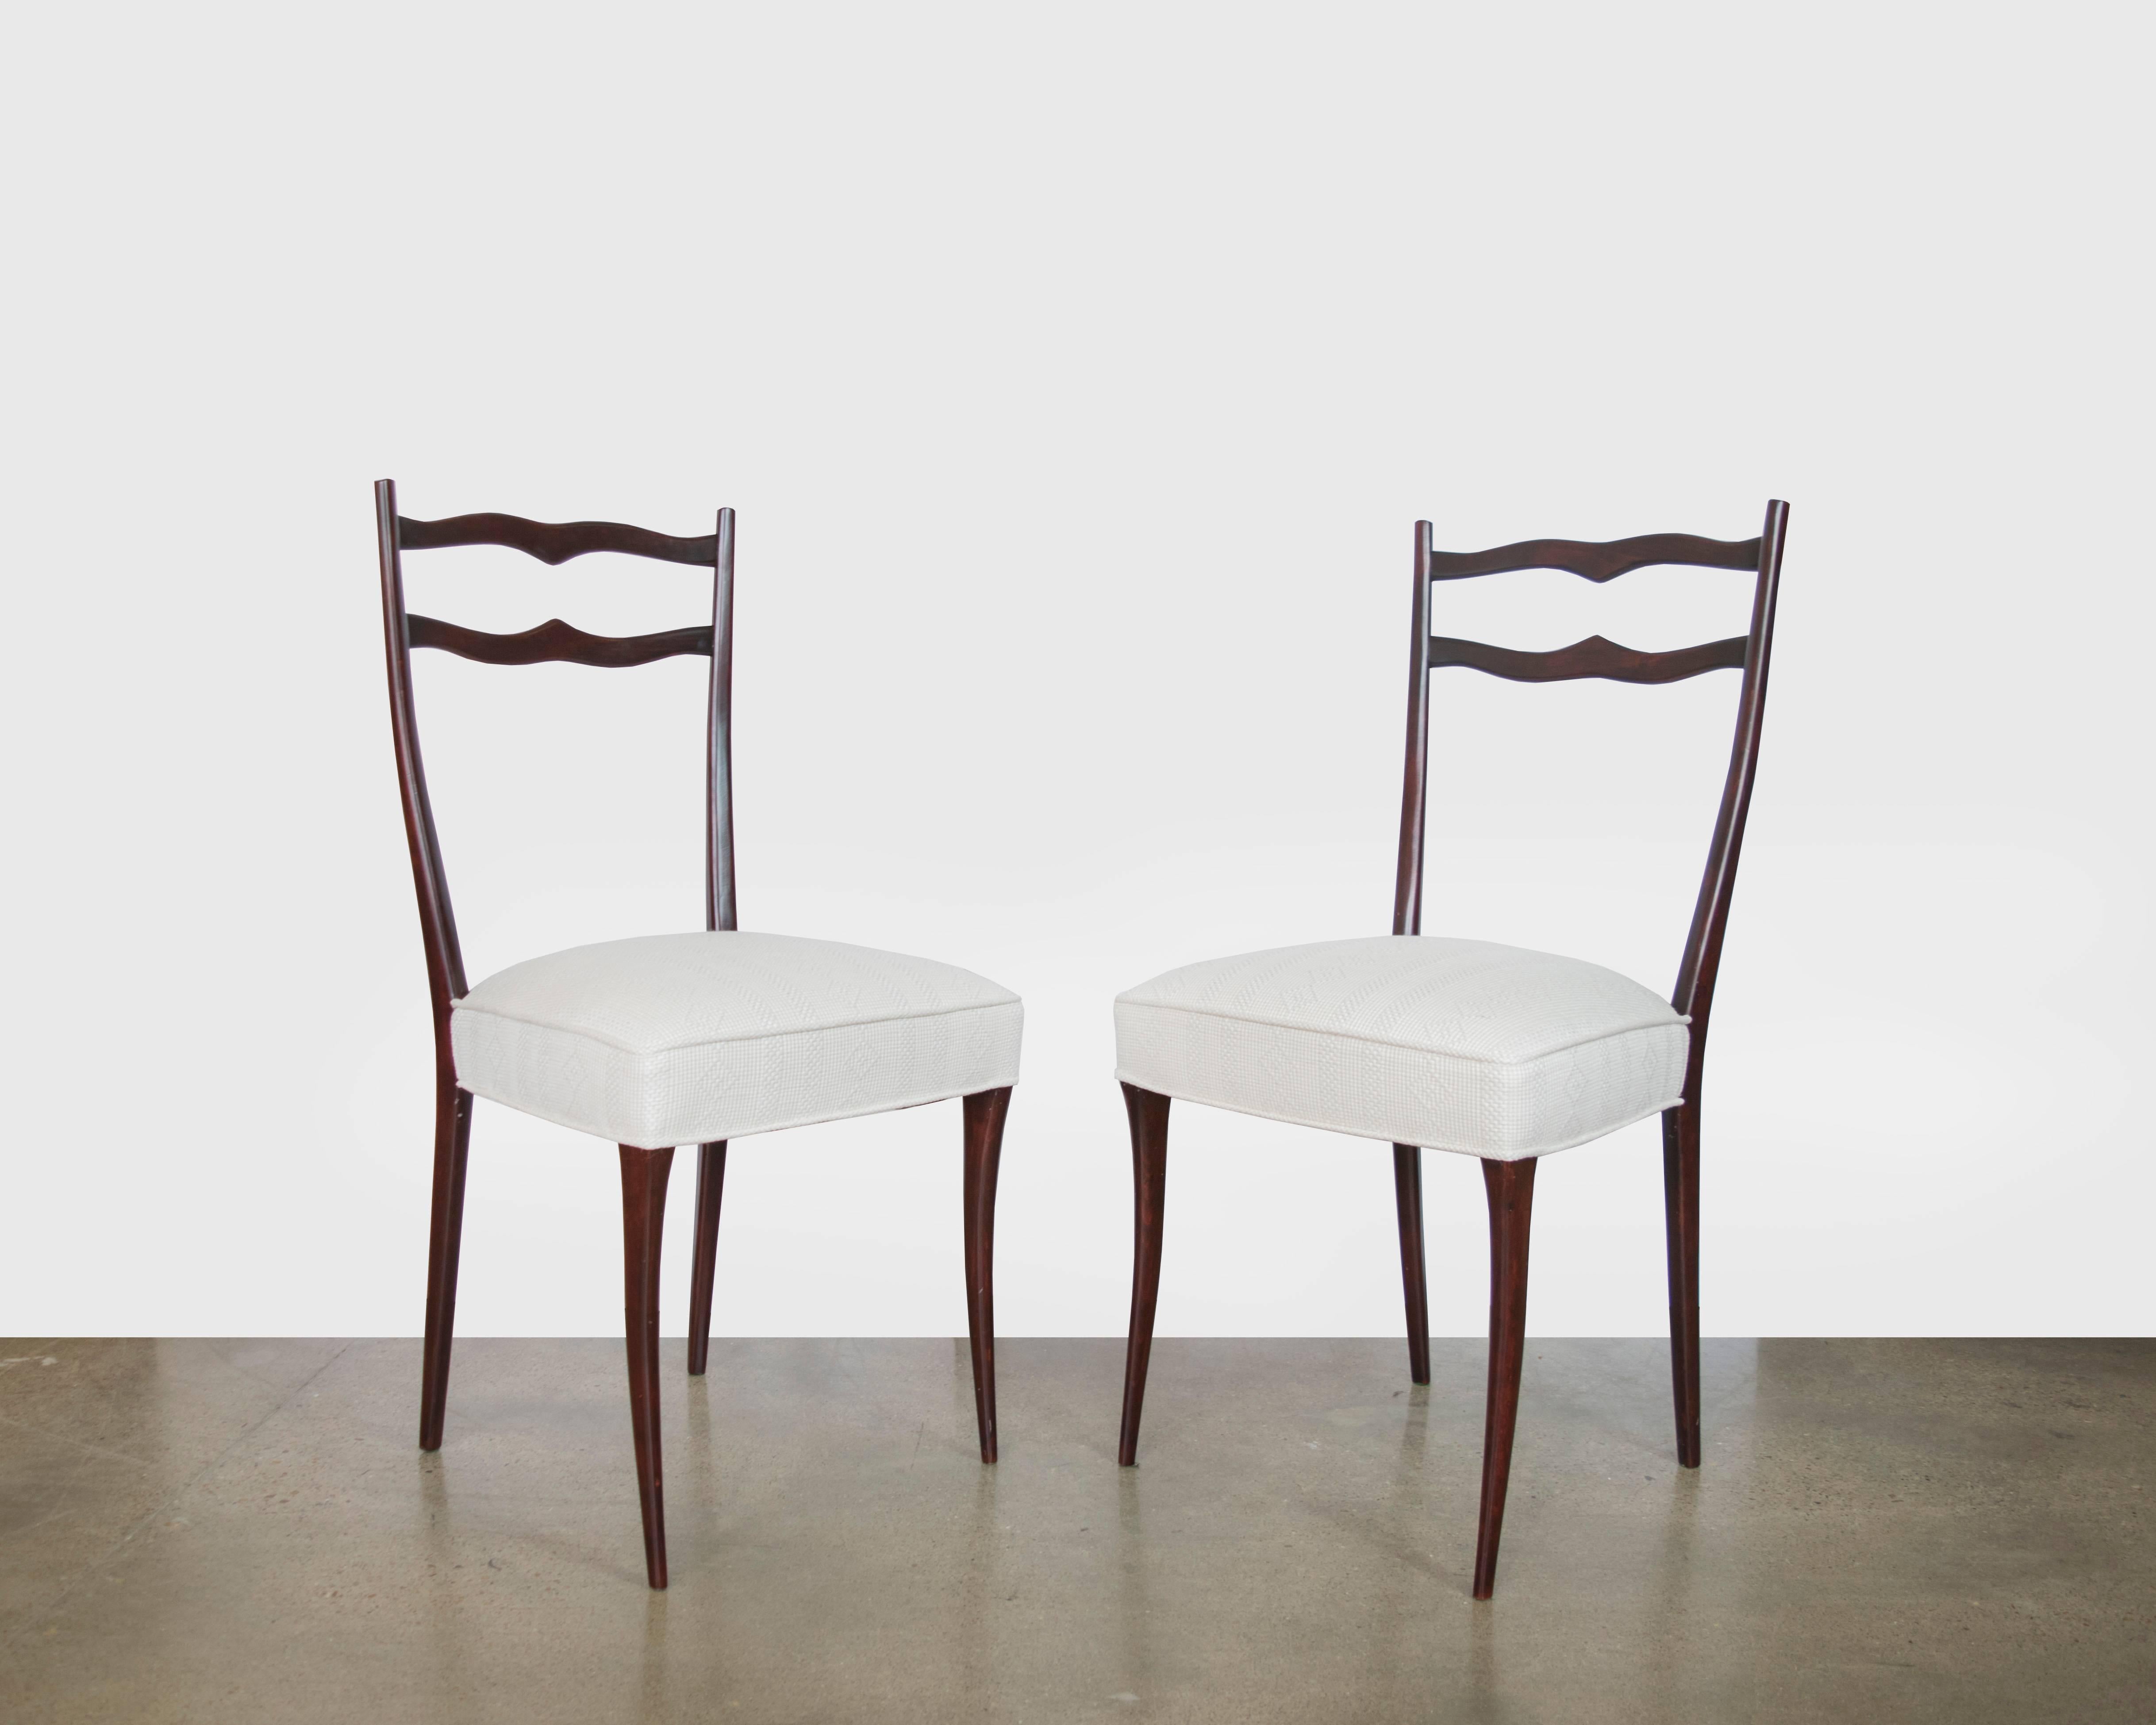 A graceful set of six dining chairs from Italy, made in the 1950s and thought to be designed by Ico Parisi. The chairs are mahogany; the seats are newly upholstered in Knoll Djenge fabric, colorway salt.